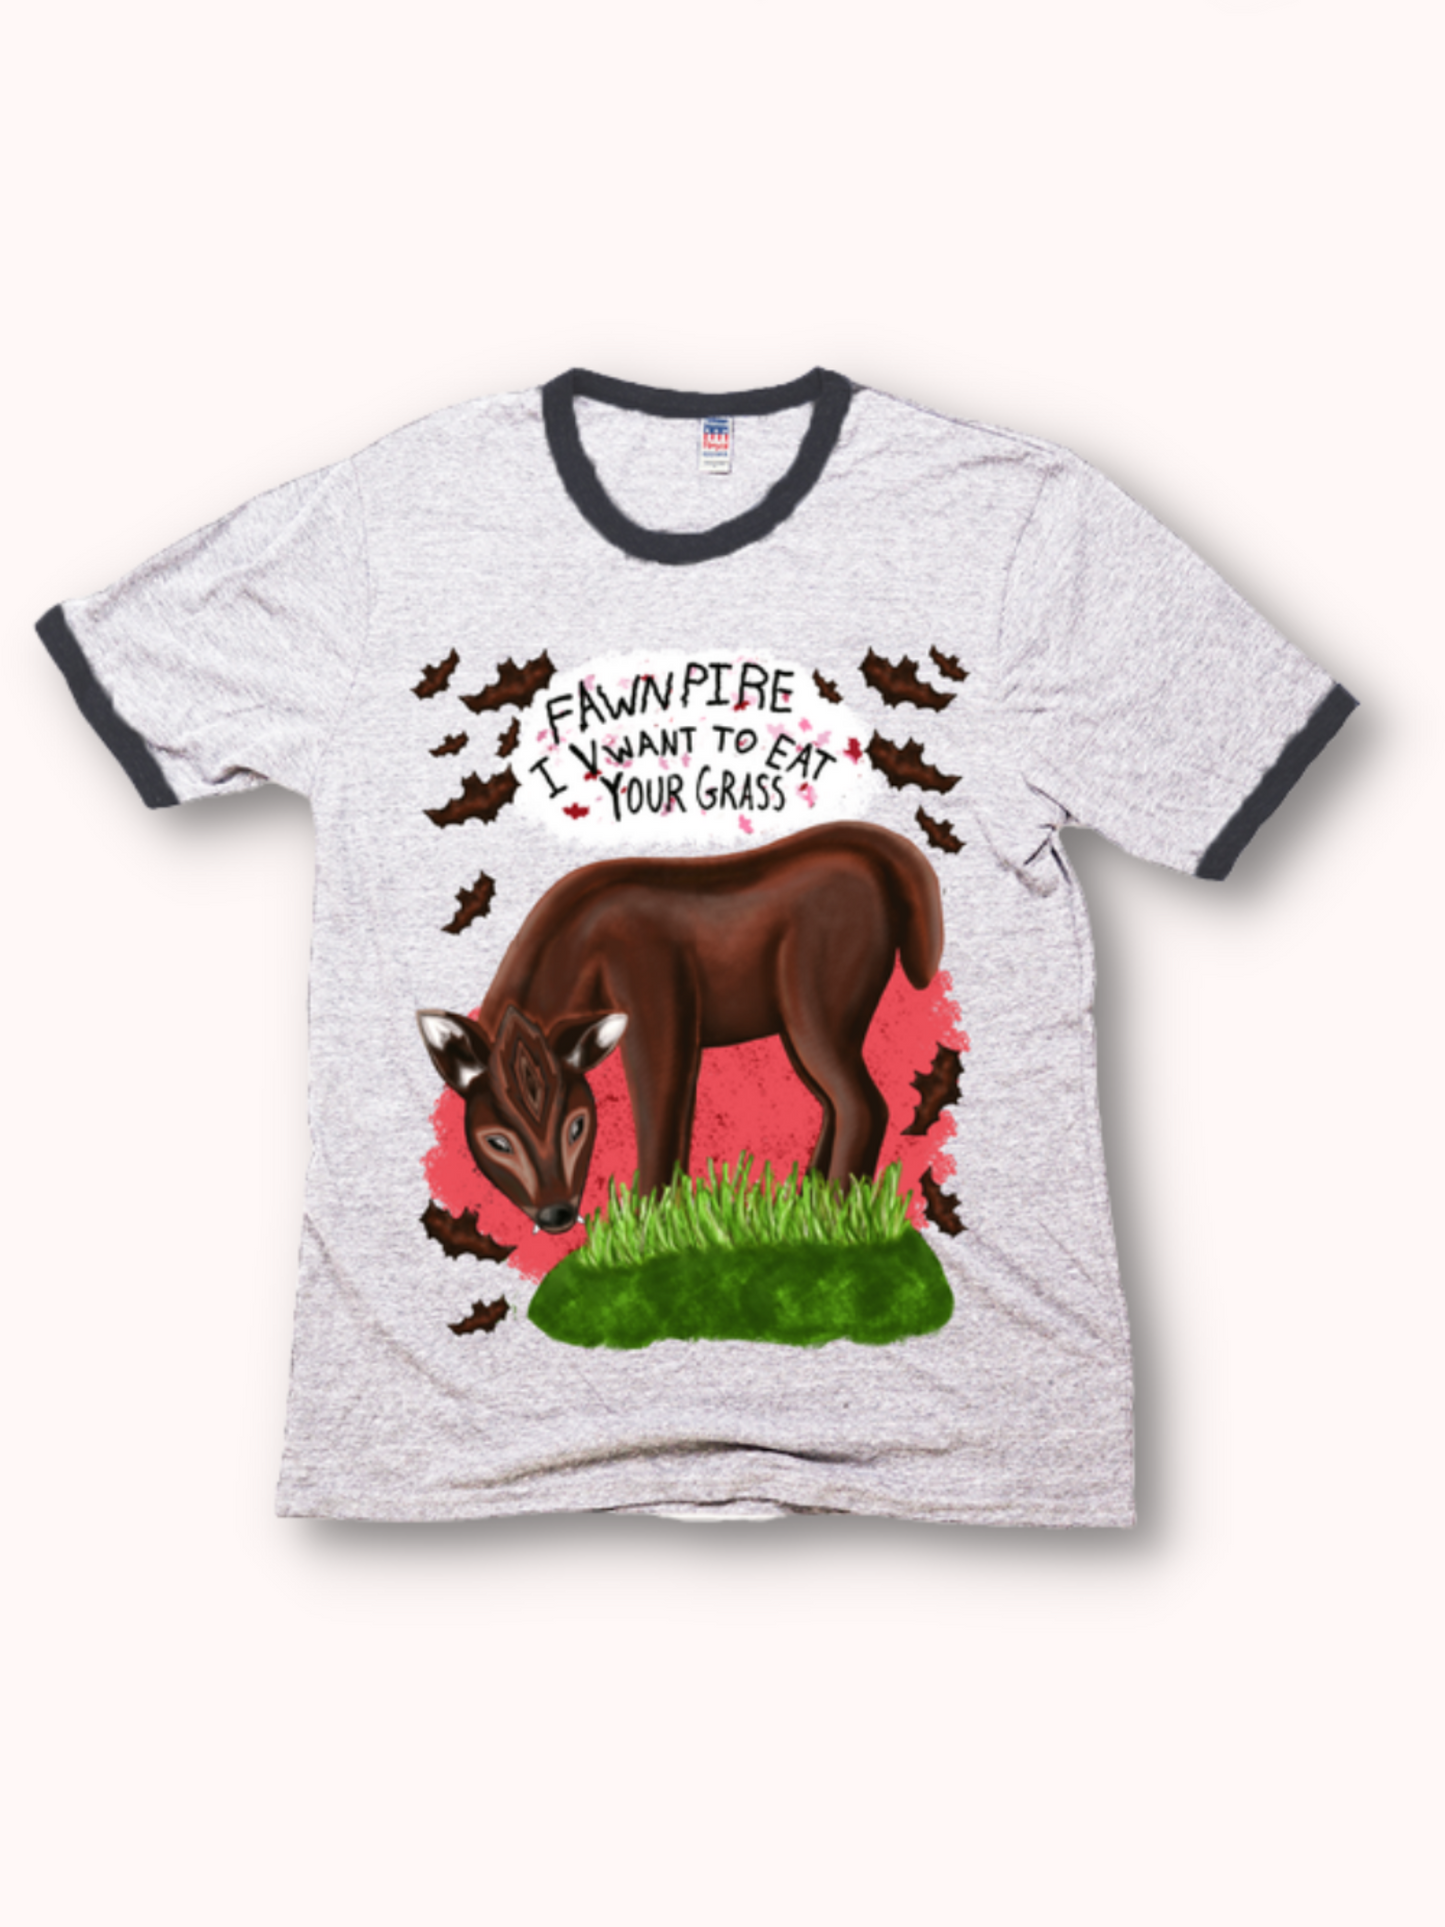 Fawnpire "I Vwant your Grass" - Unisex - USA Made Triblend Ringer Tee